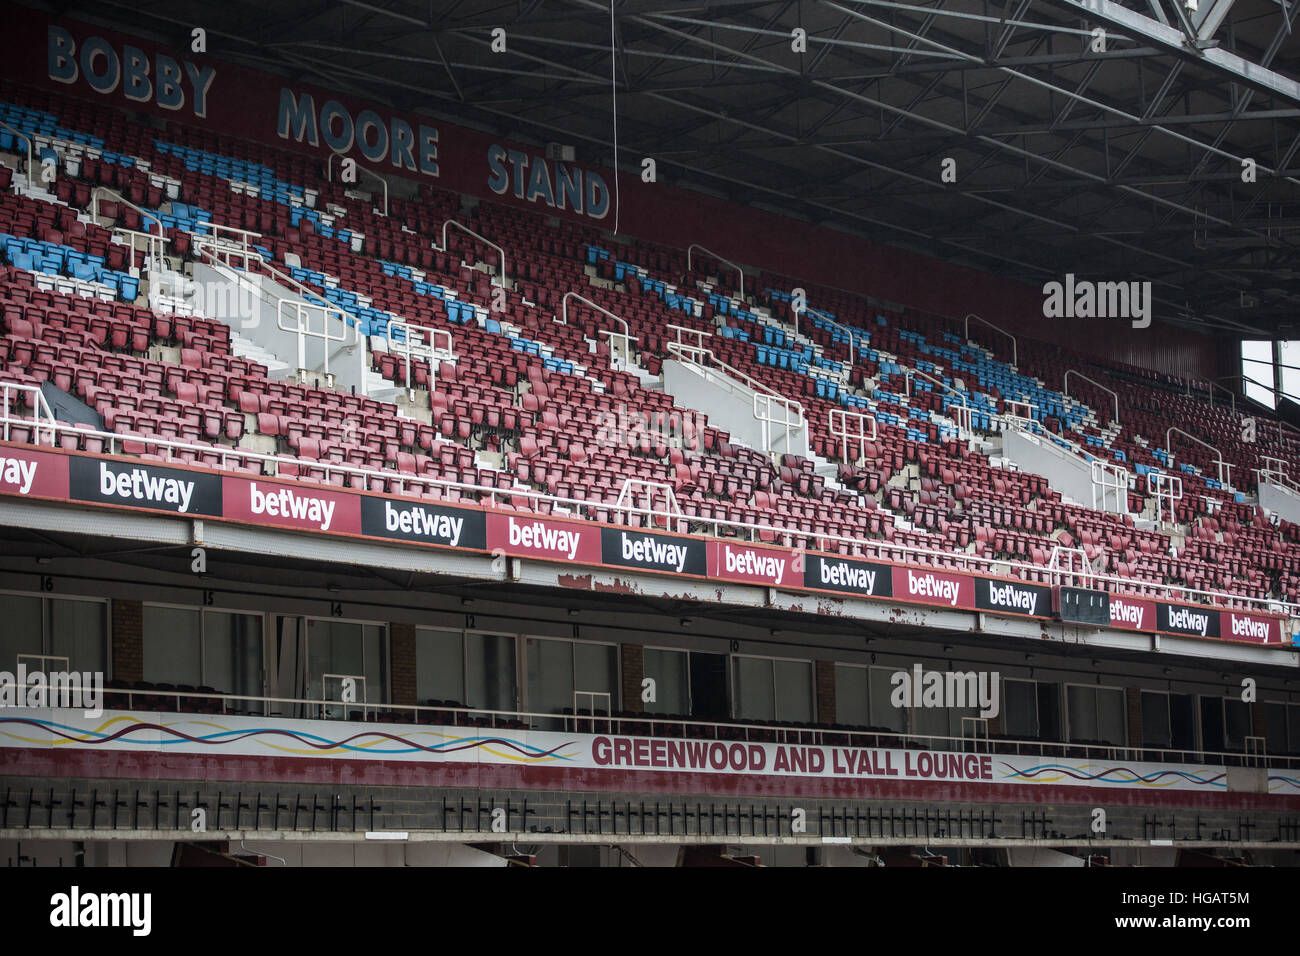 London, UK. 7th January 2017. The lower tier of the Bobby Moore Stand at West Ham United's former Boleyn Ground stadium has now been stripped as part of demolition works in preparation for the Upton Gardens development. Credit: Mark Kerrison/Alamy Live News Stock Photo